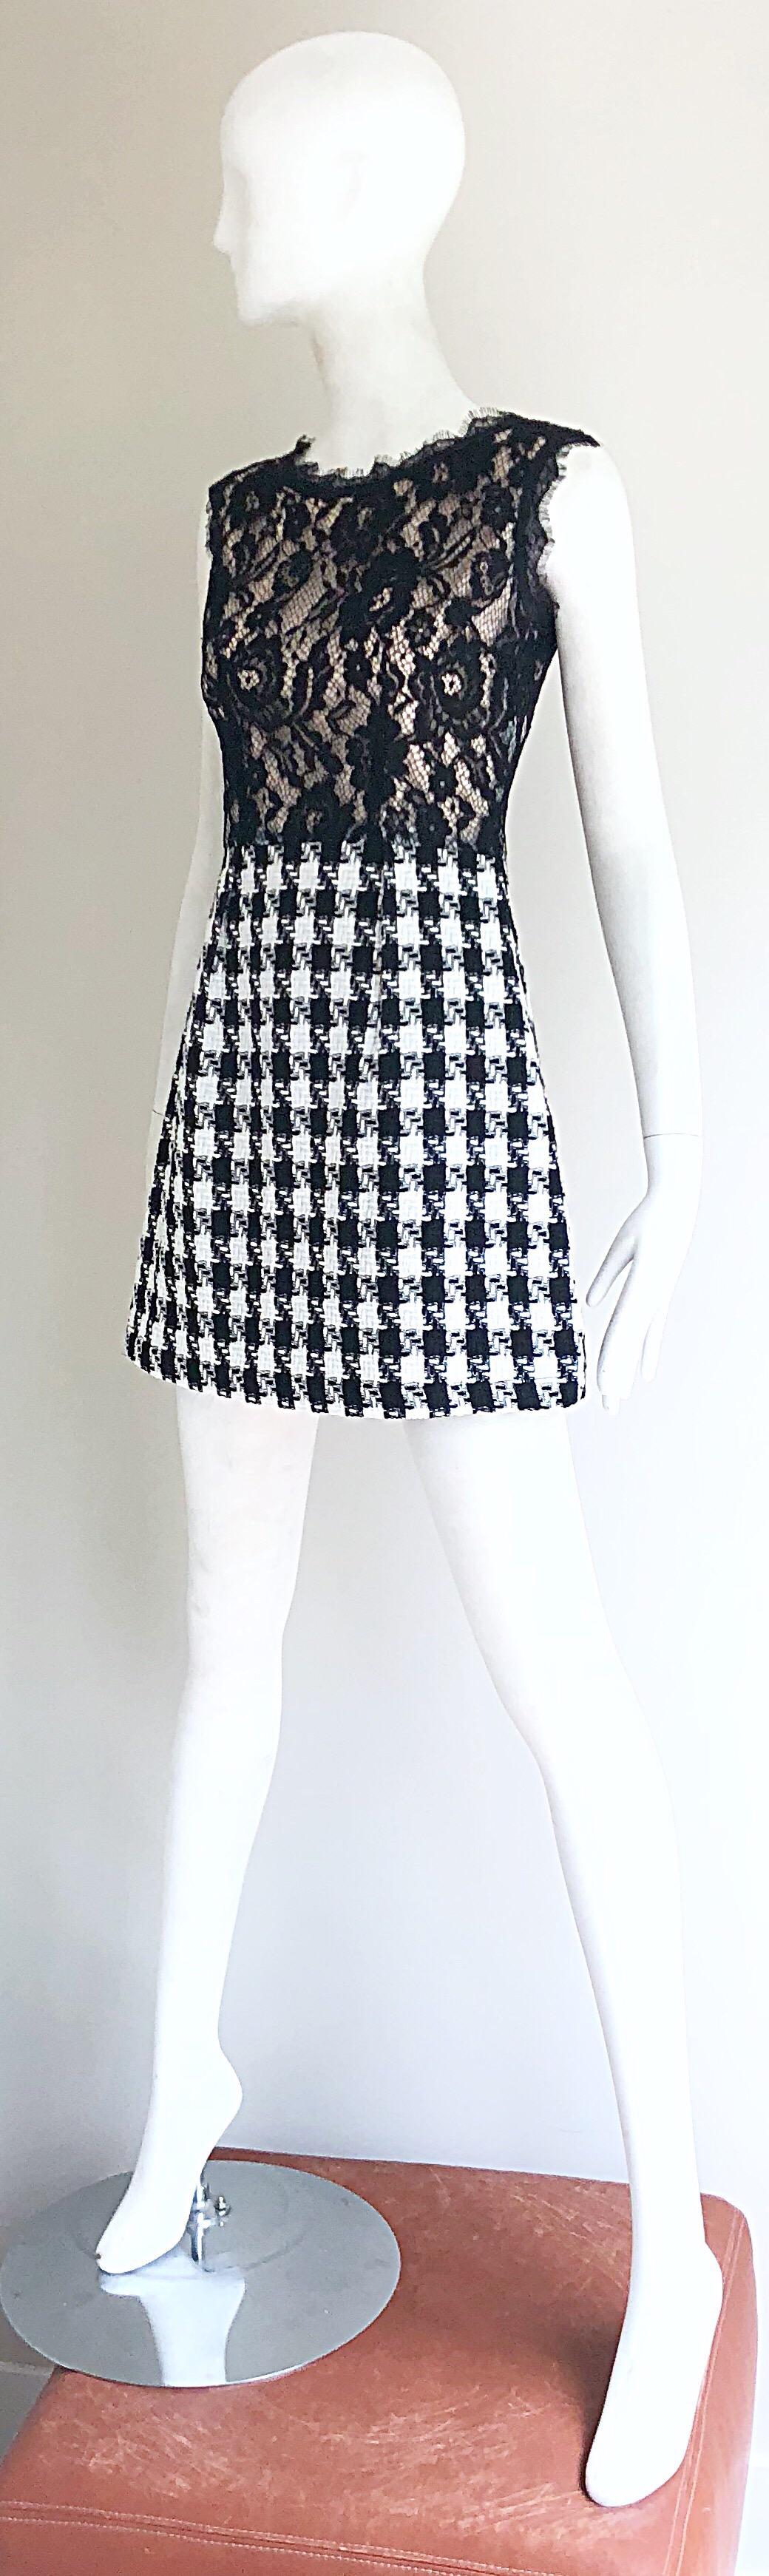 Marc Jacobs Early 2000s Black and White Lace Houndstooth Checkered Mini Dress For Sale 5